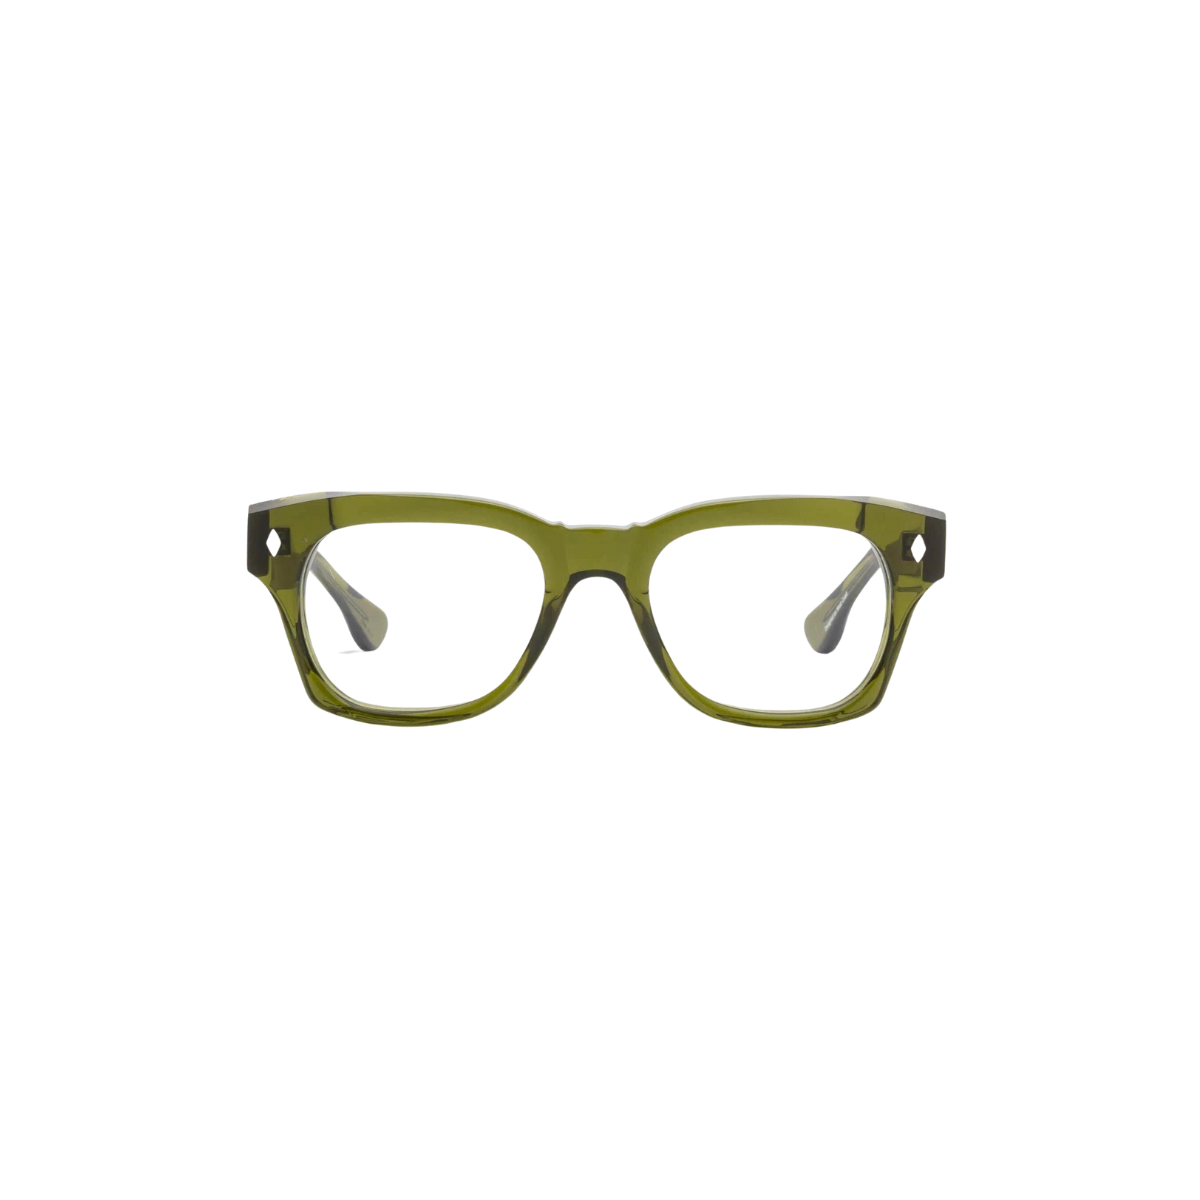 Caddis Muzzy Reading Glasses in Heritage Green